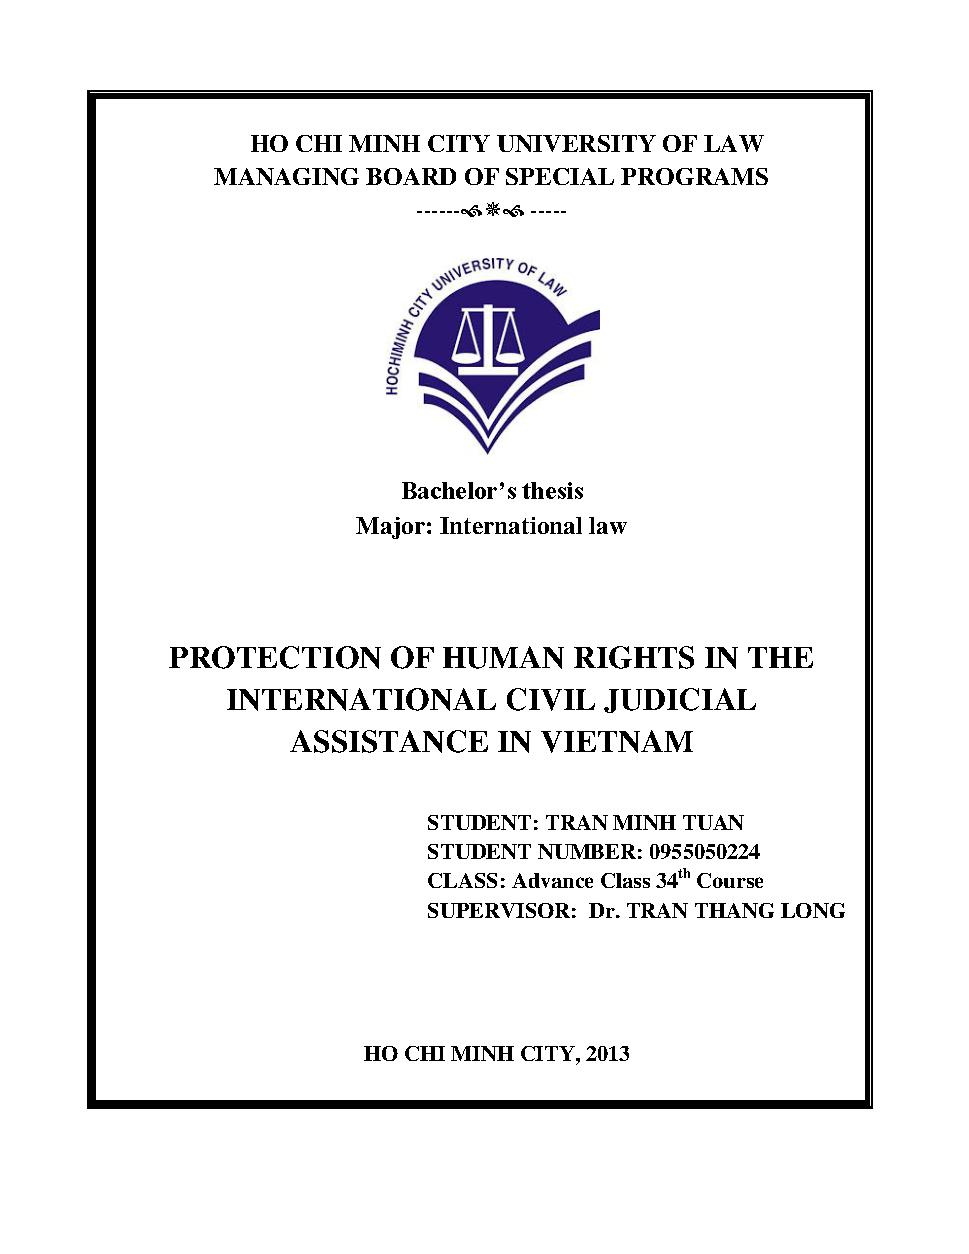 Protection of human rights in the international civil judicial assistance in Vietnam